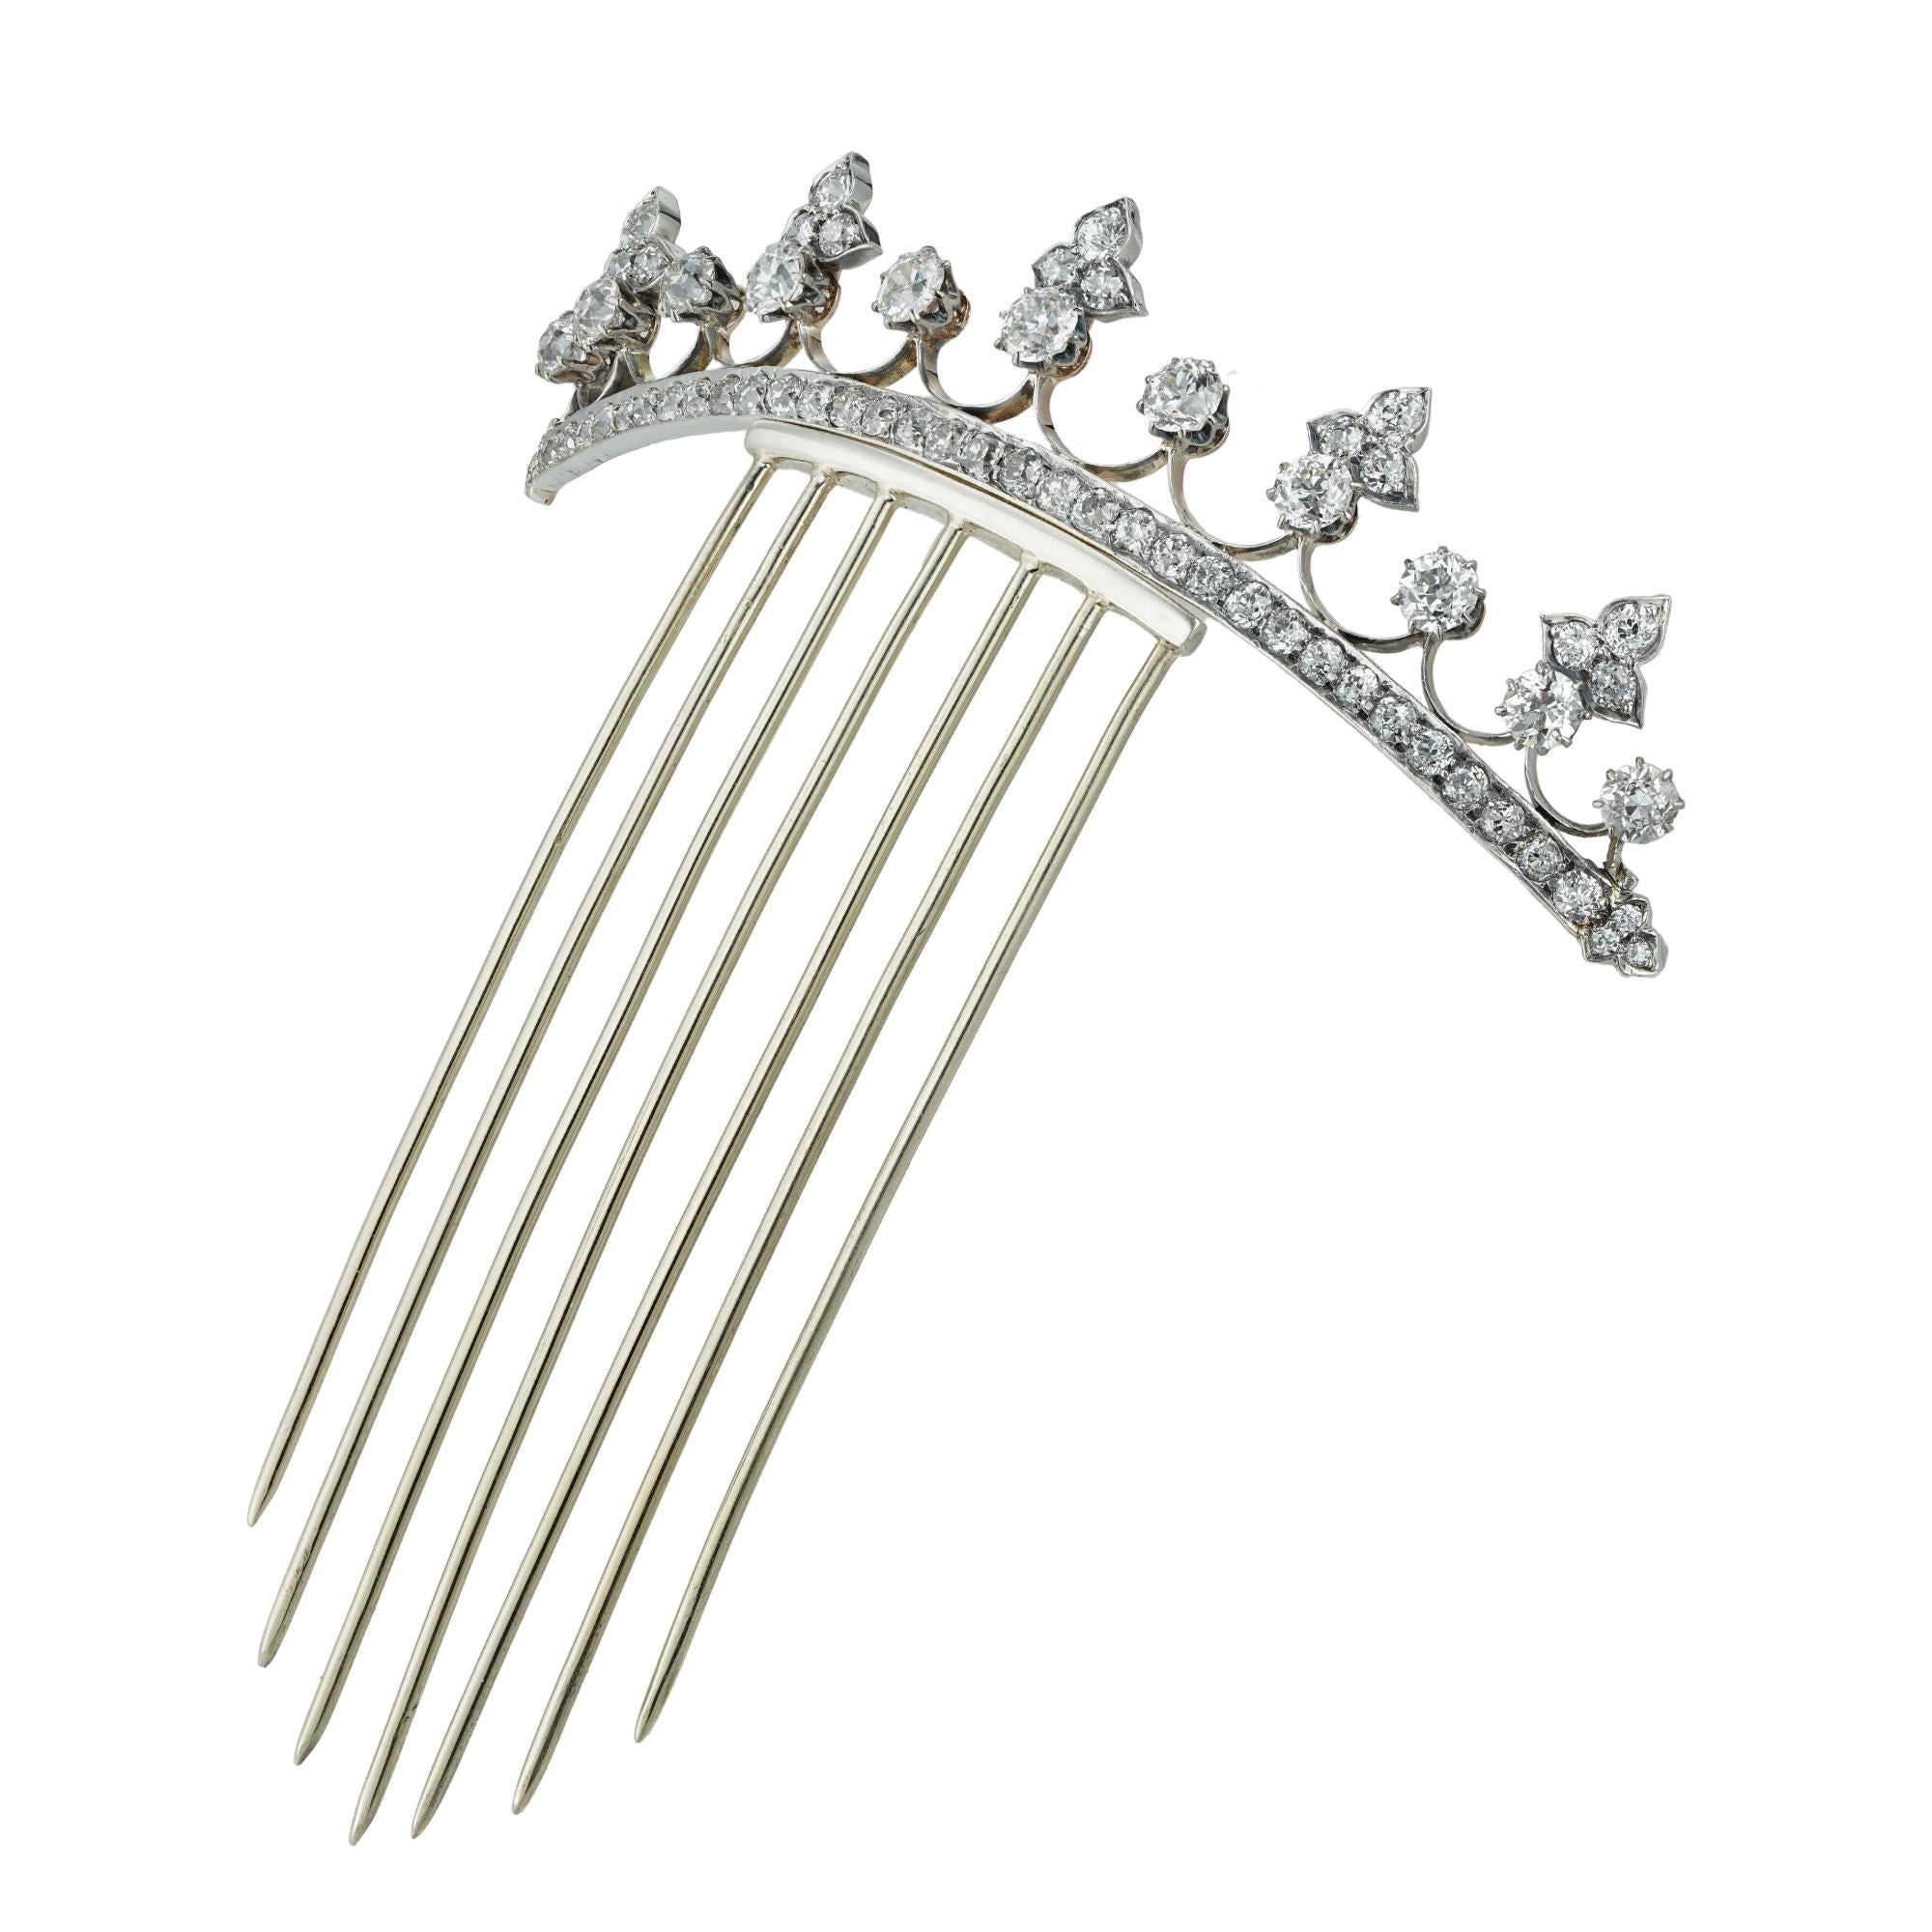 A Late Victorian Small Diamond-set Tiara, consisting of eleven old mine-cut diamonds graduating from the centre, five of them flanked with trefoil diamond-set decorations , to openwork silver and gold scrolls, the base in the form of a line set with